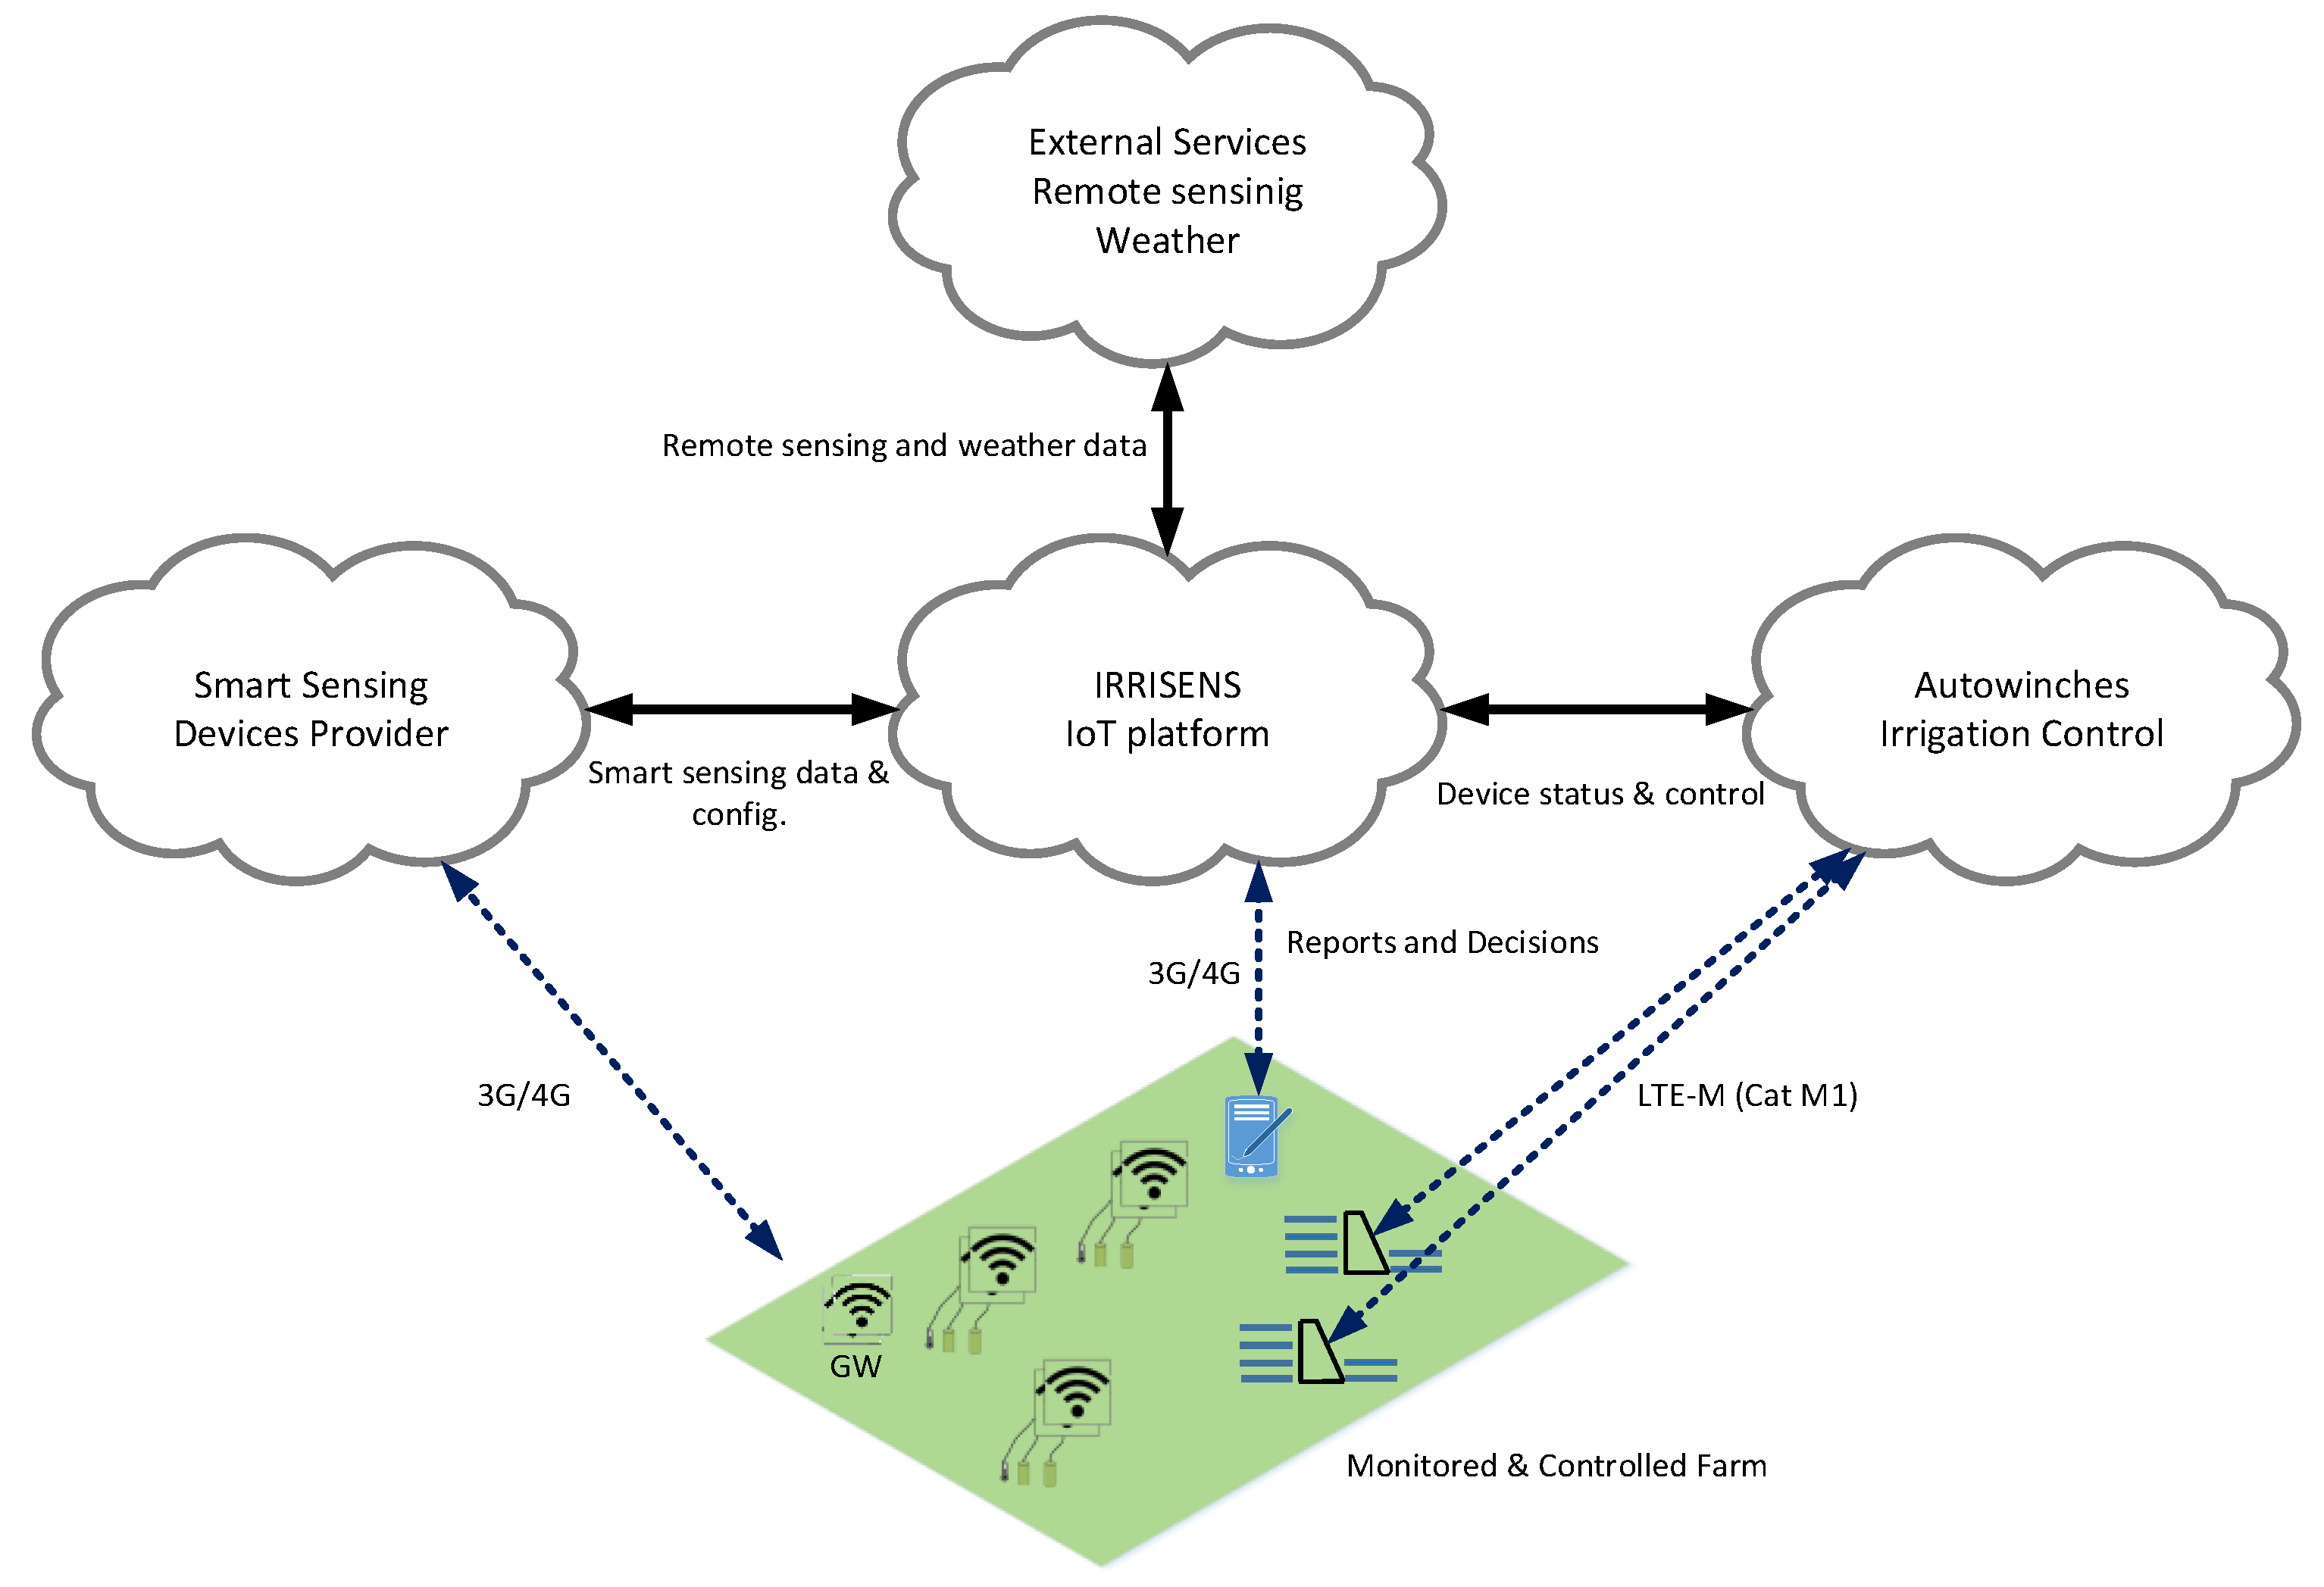 Sensors Free Full Text Irrisens An Iot Platform Based On Microservices Applied In Commercial Scale Crops Working In A Multi Cloud Environment Html